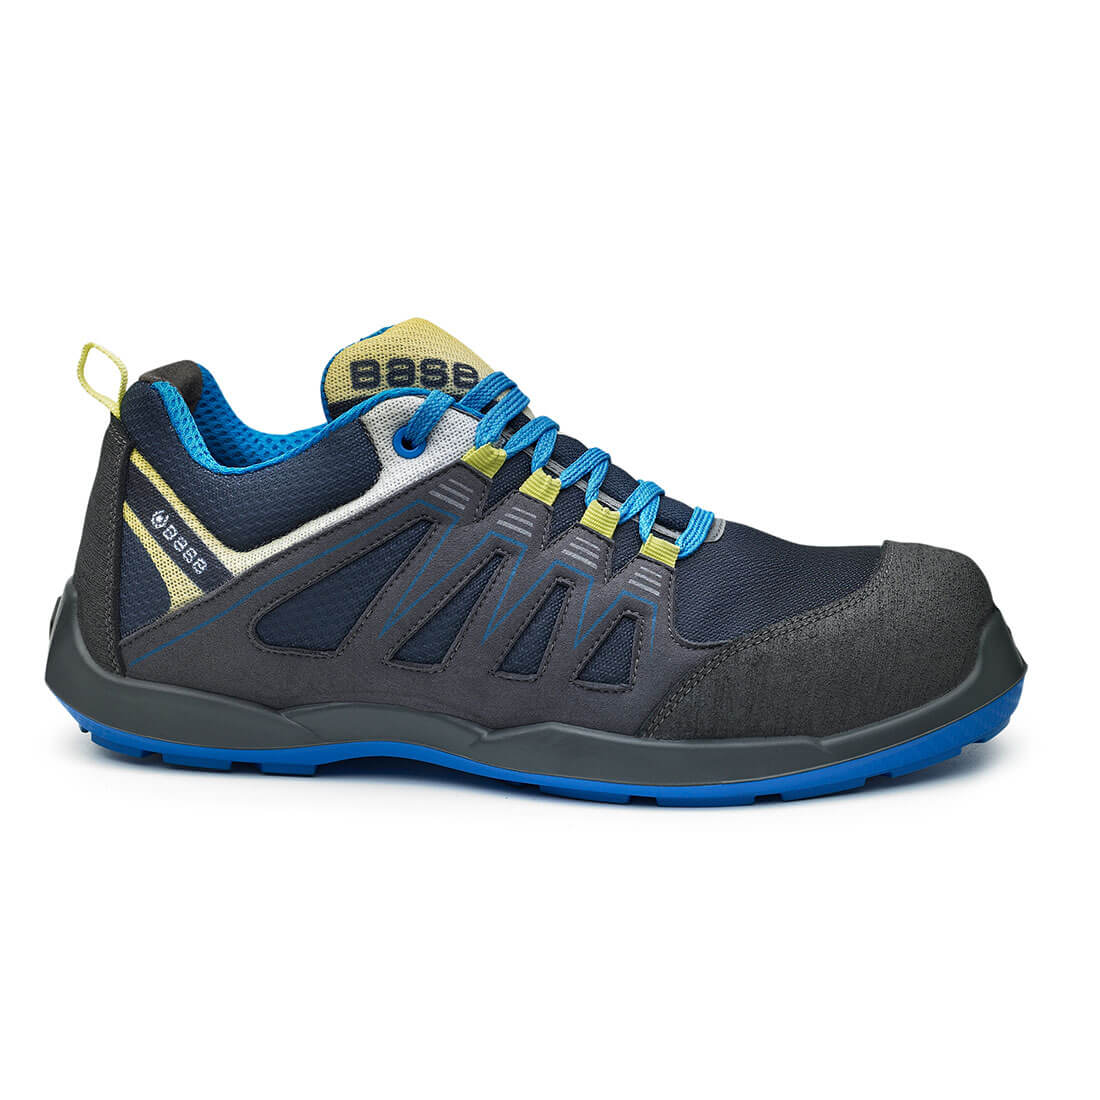 Base PADDLE Low Shoes Navy/Yellow B0657